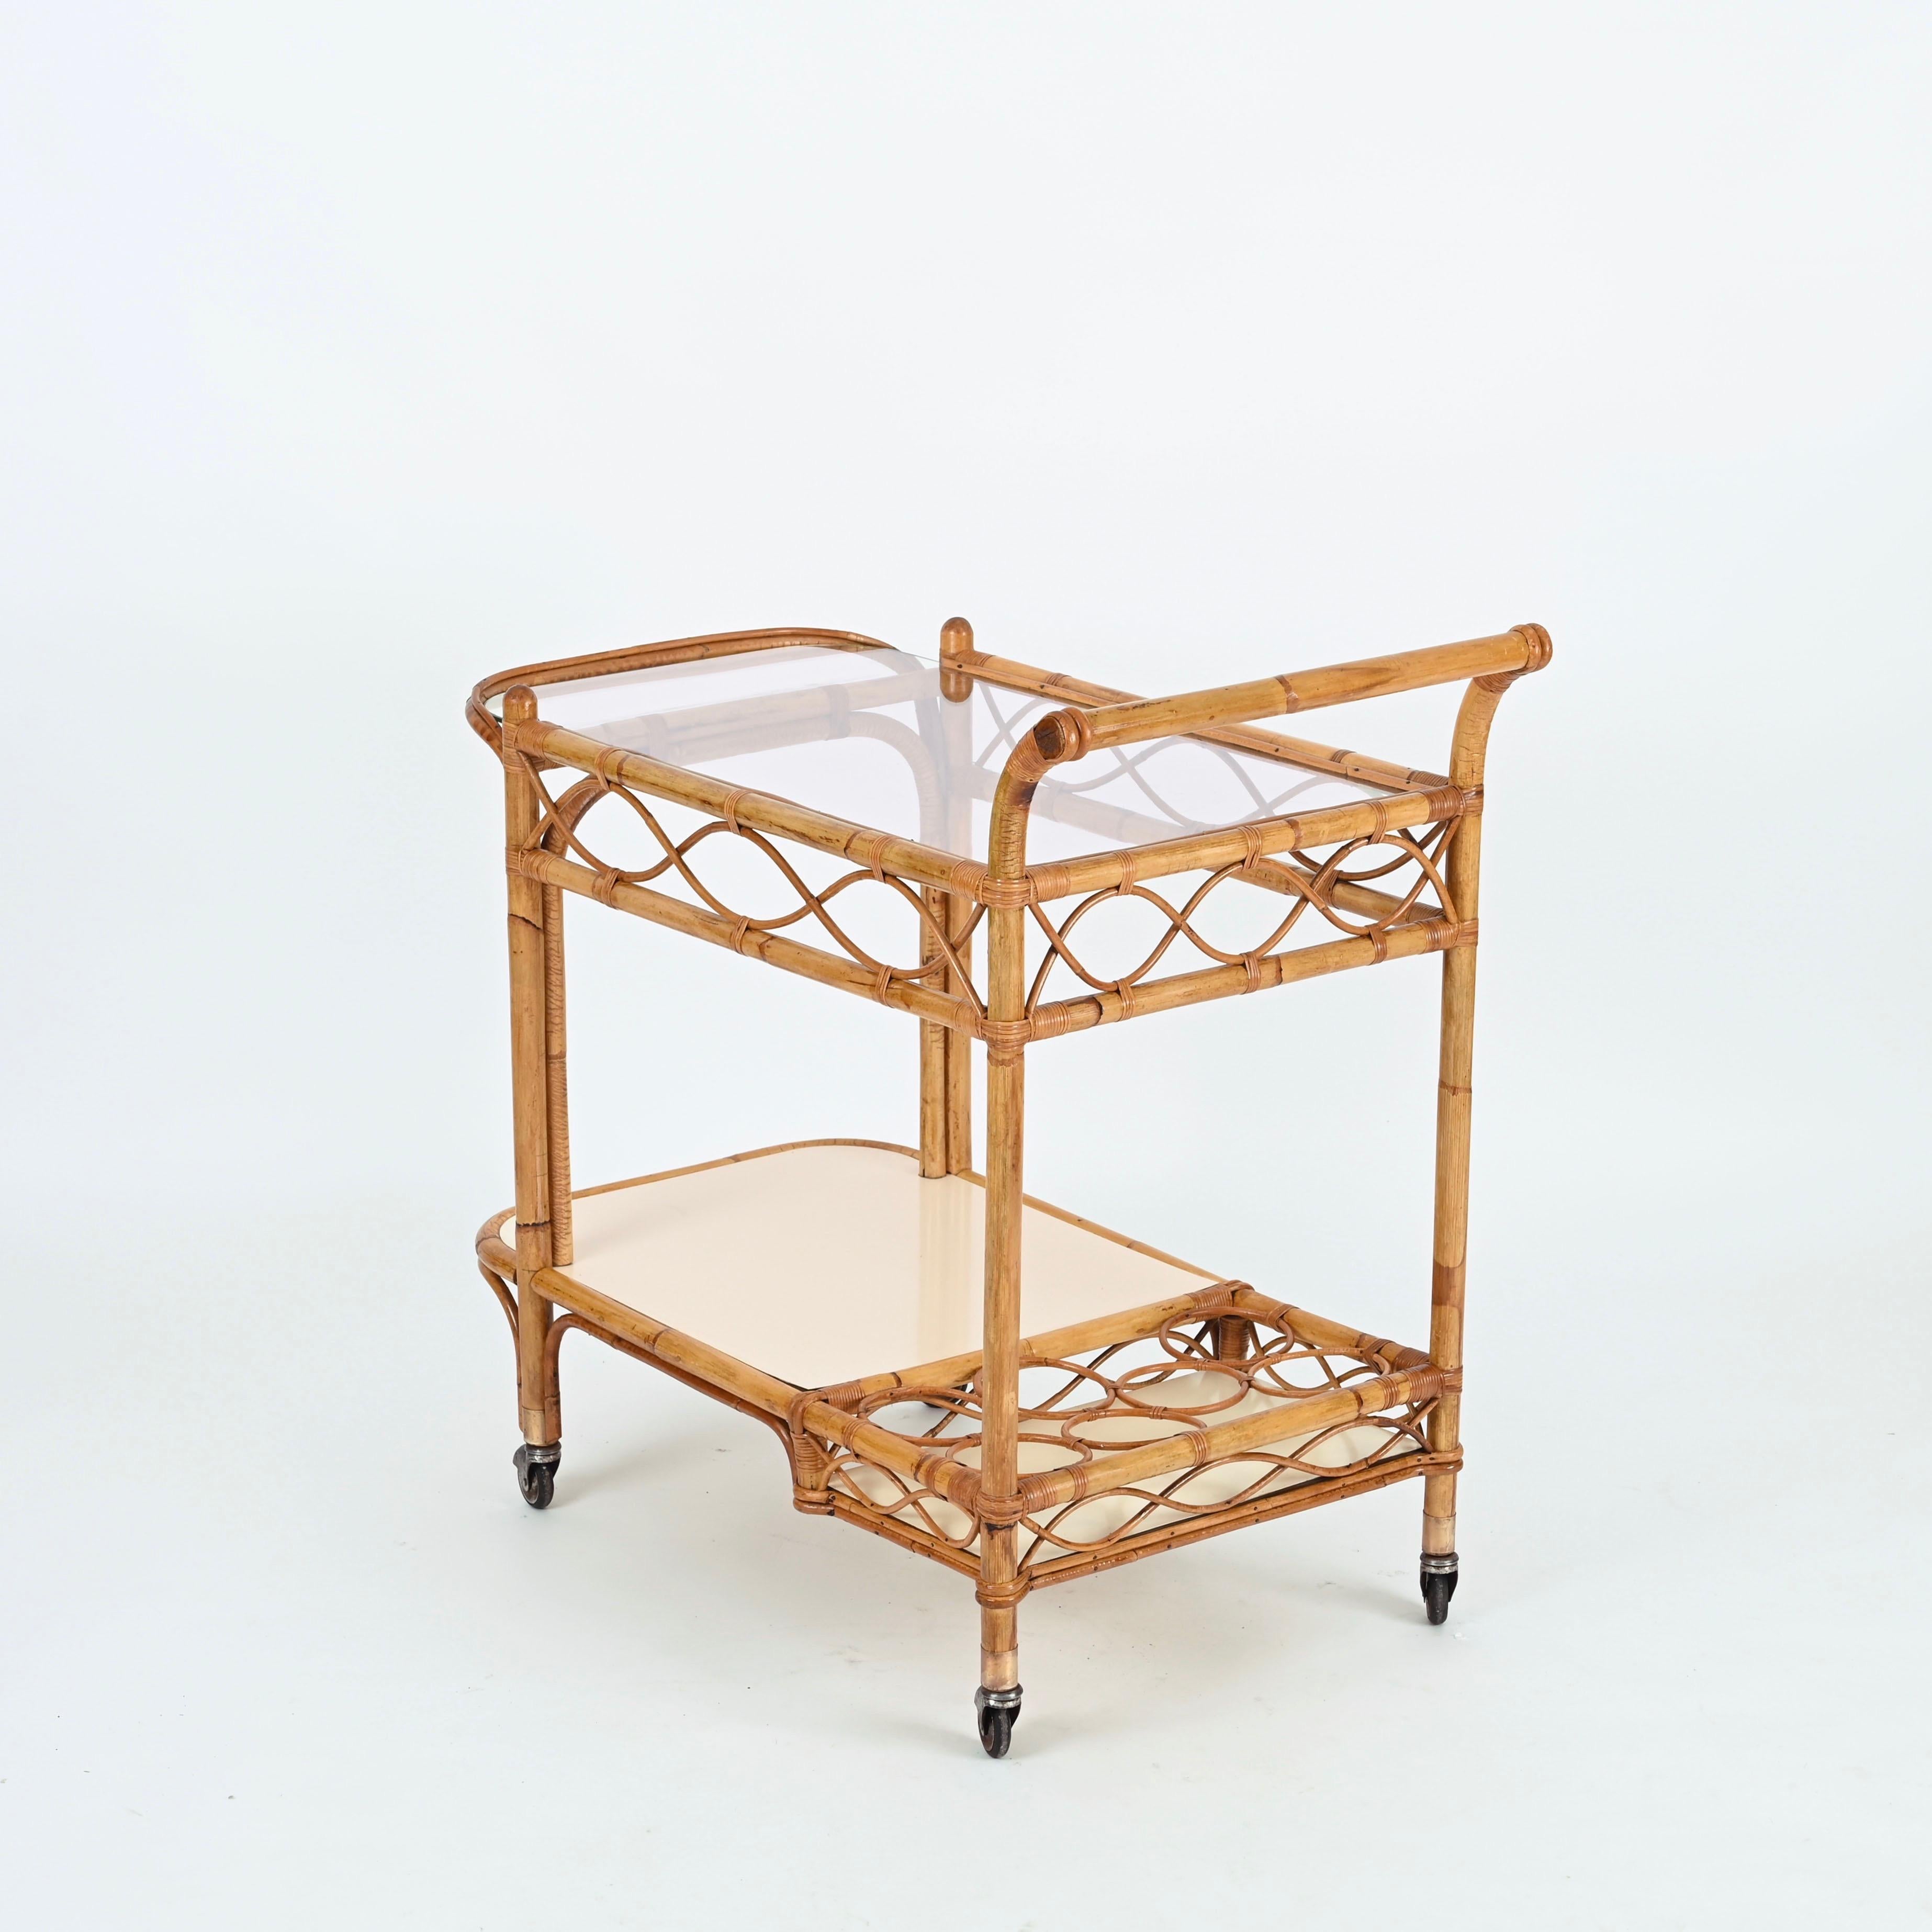 Midcentury Italian Bamboo, Rattan and Formica Bar Serving Cart, Italy 1960s For Sale 2